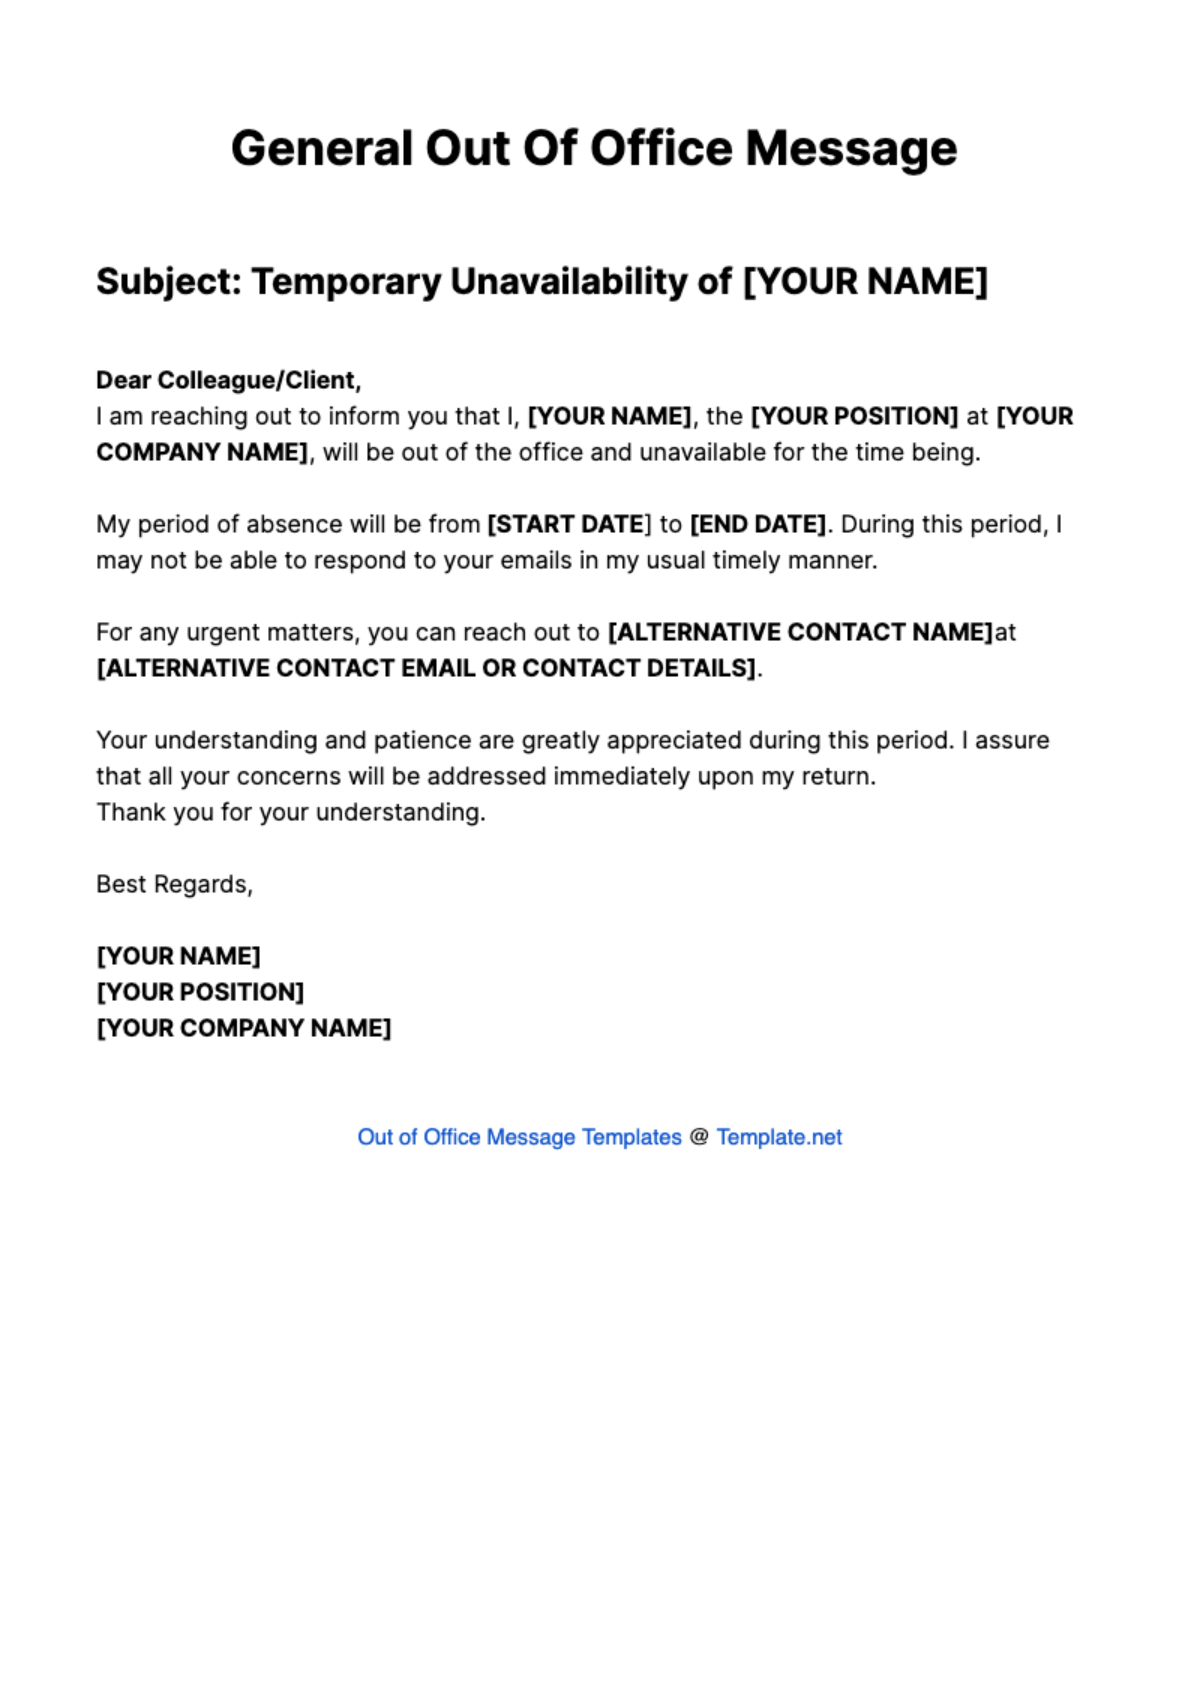 General Out Of Office Message Template